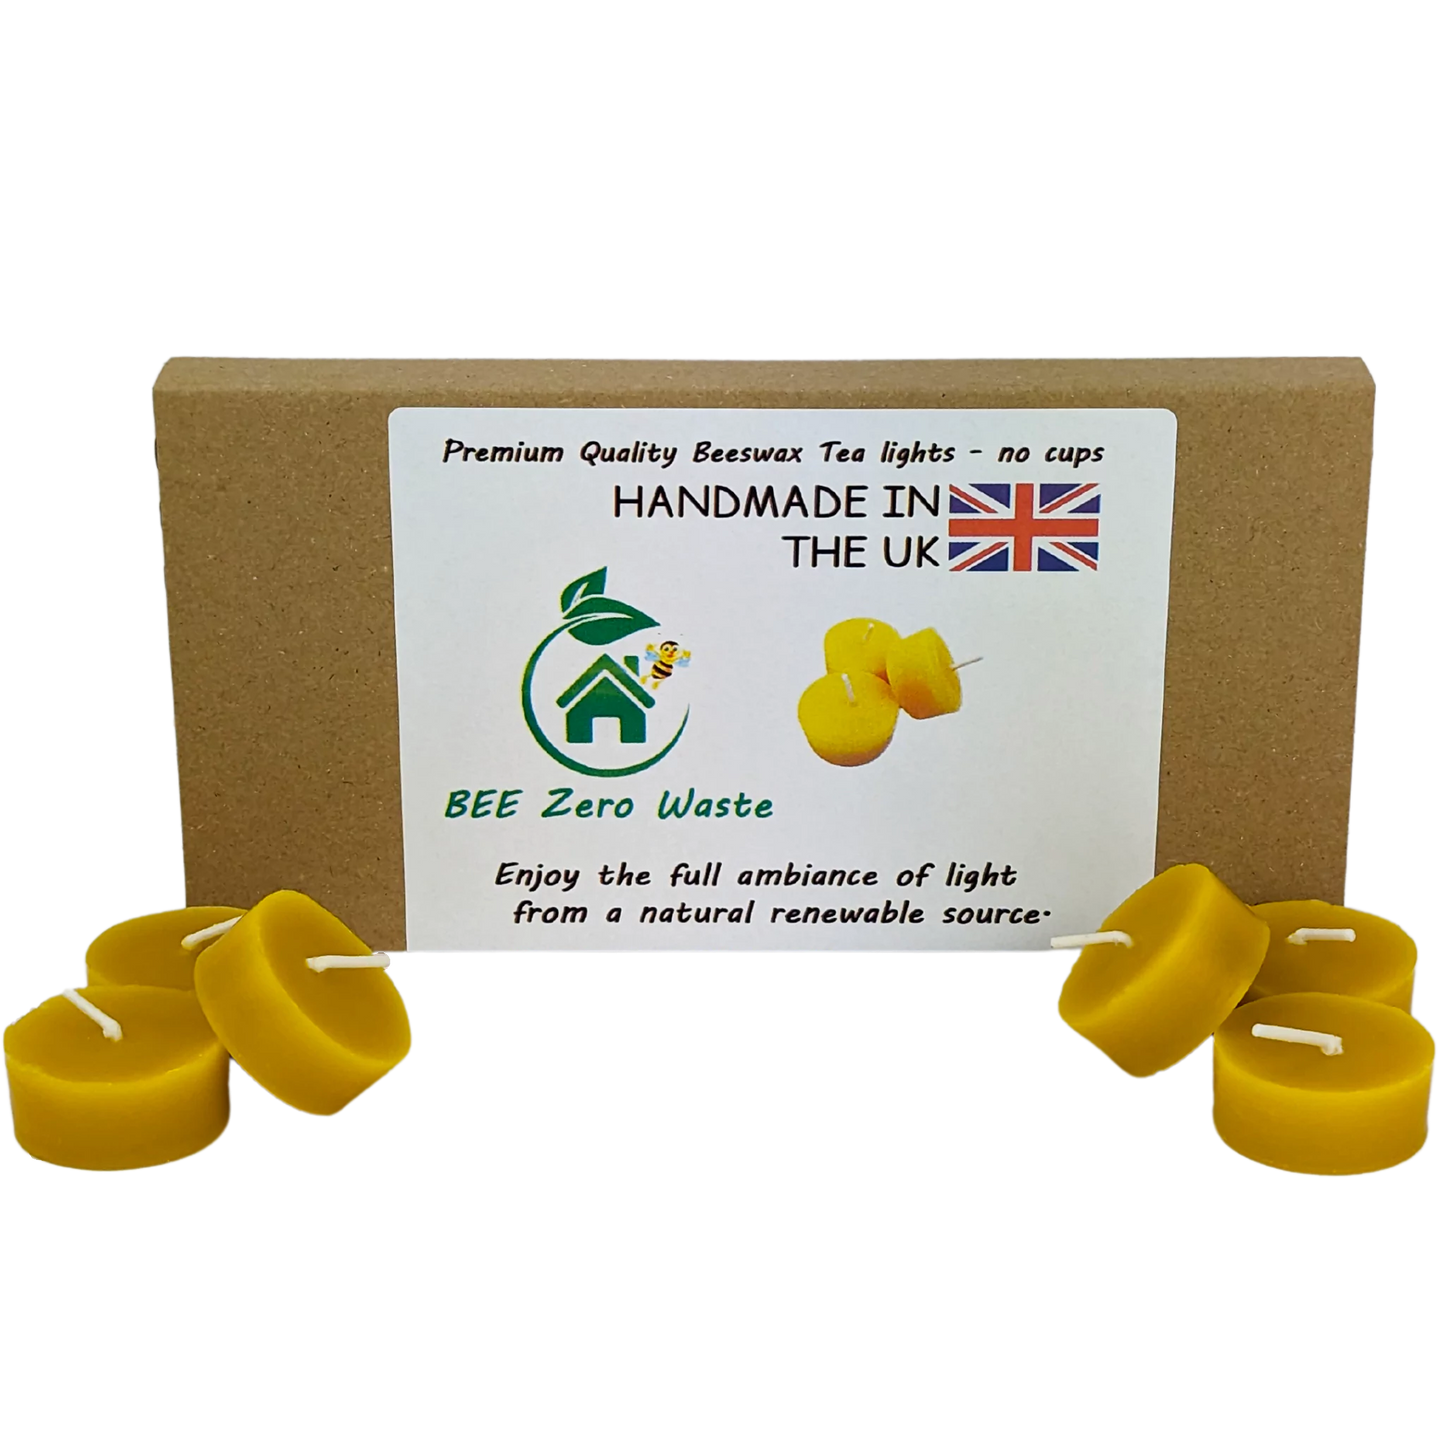 Organic beeswax tealight candles arranged neatly, emitting a soft, natural light and a gentle honey scent, ideal for eco-friendly lighting